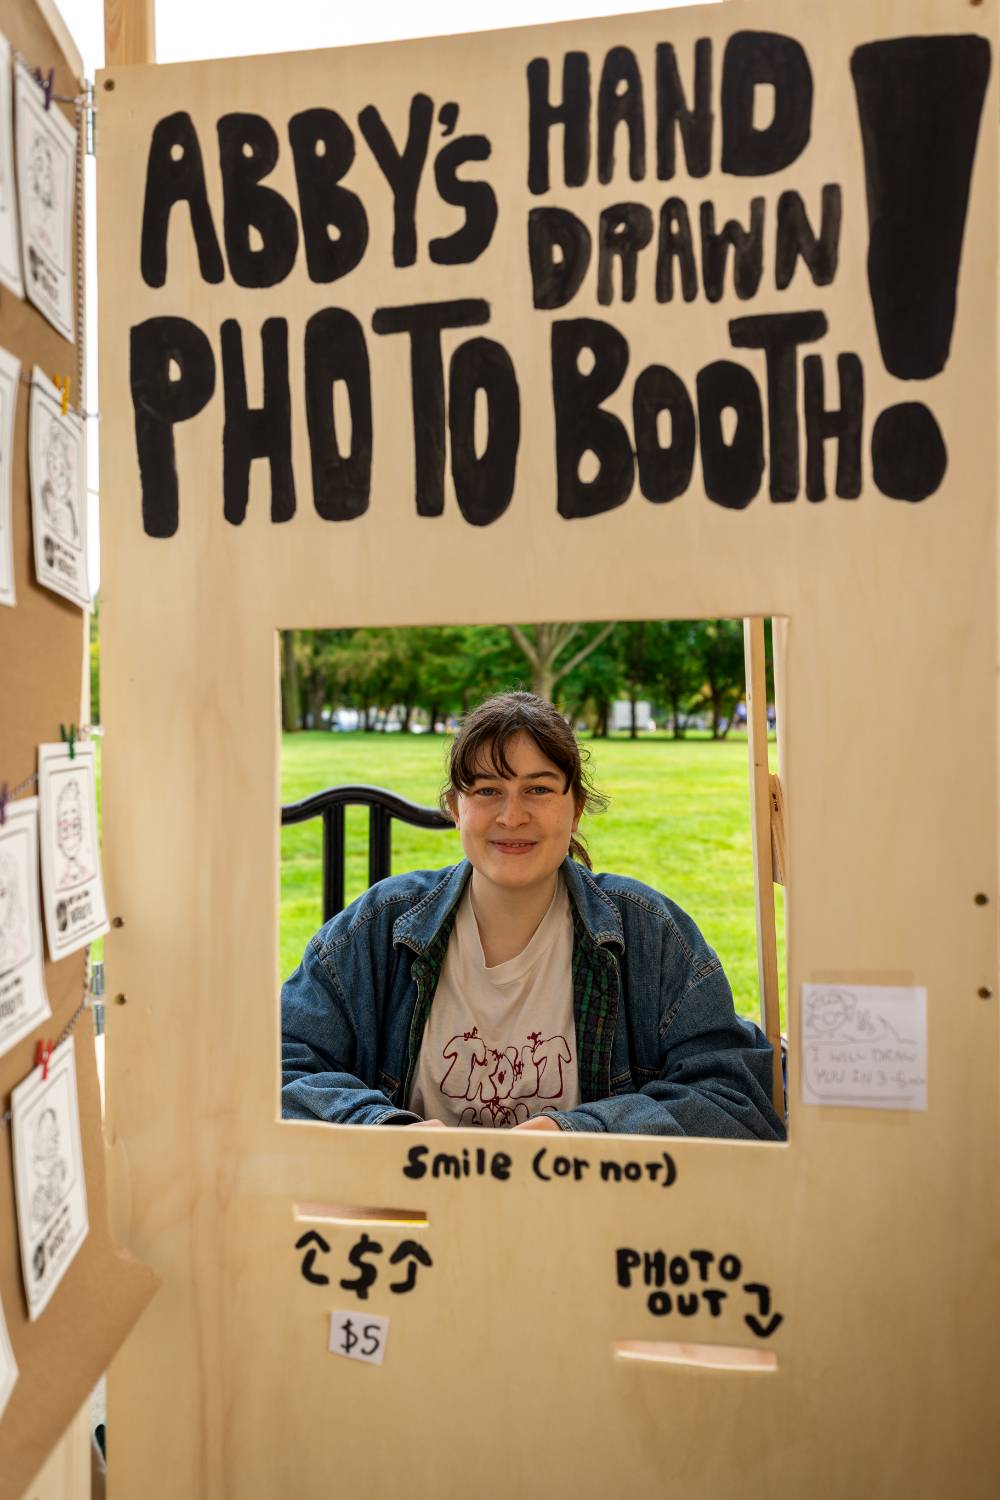 Hand drawn photo booth display during the Student Small Business Market.